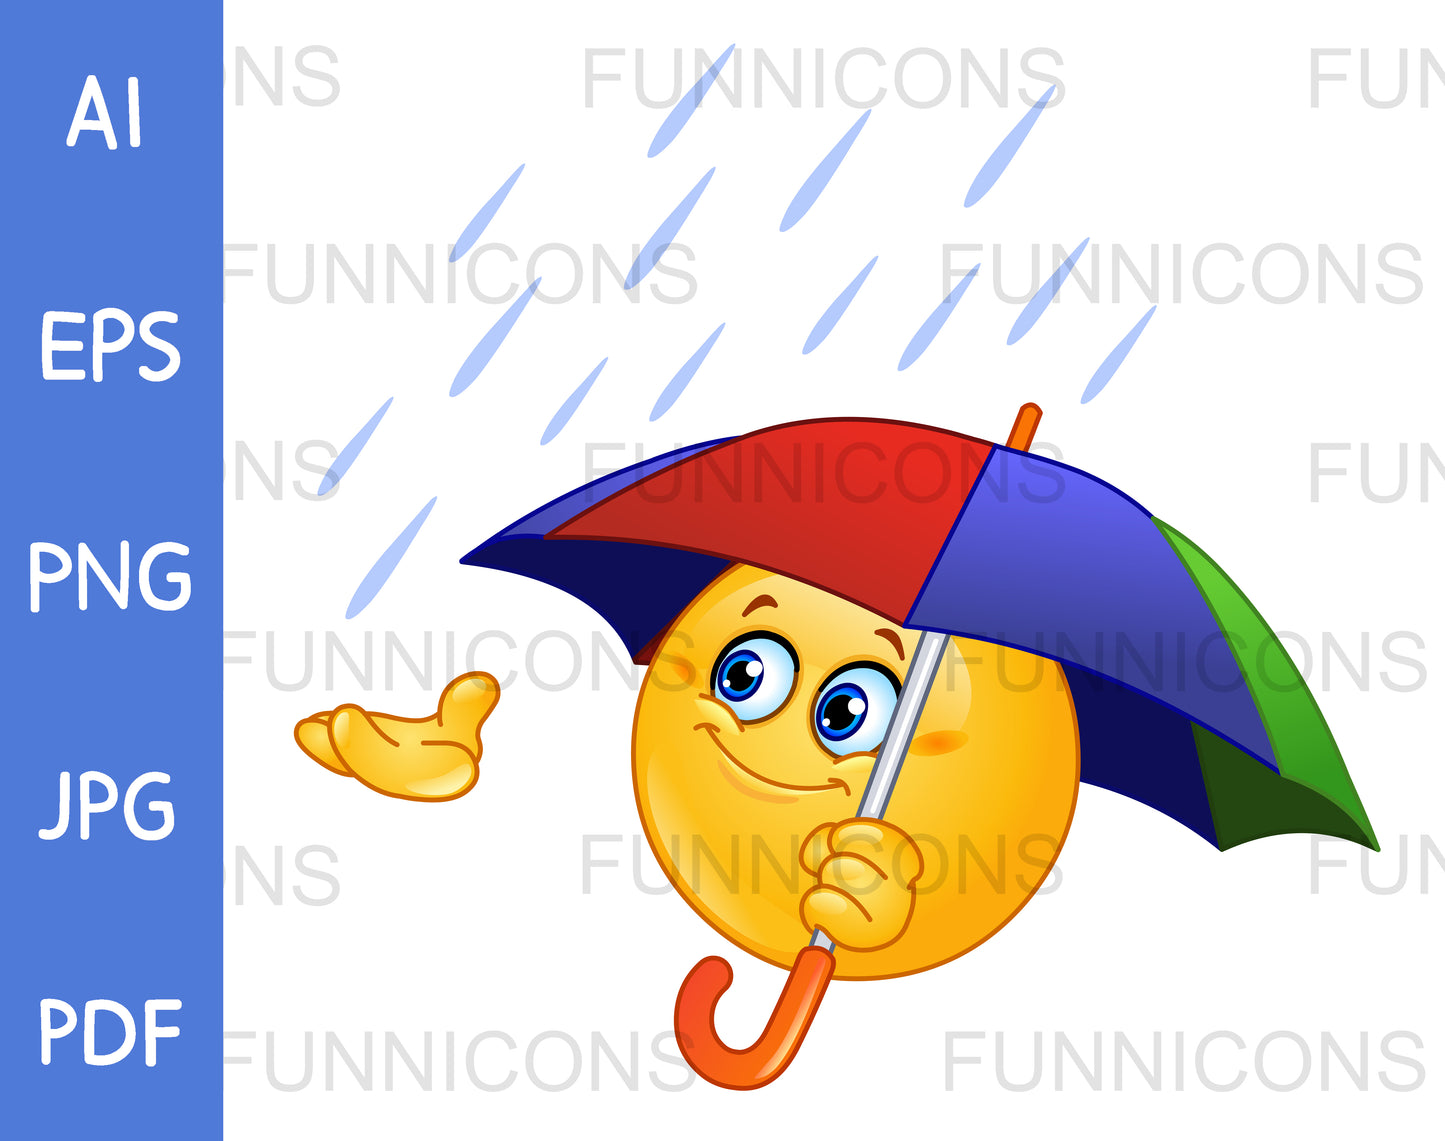 Smiling Emoji Catching Rain in his Hand and Holding an Umbrella